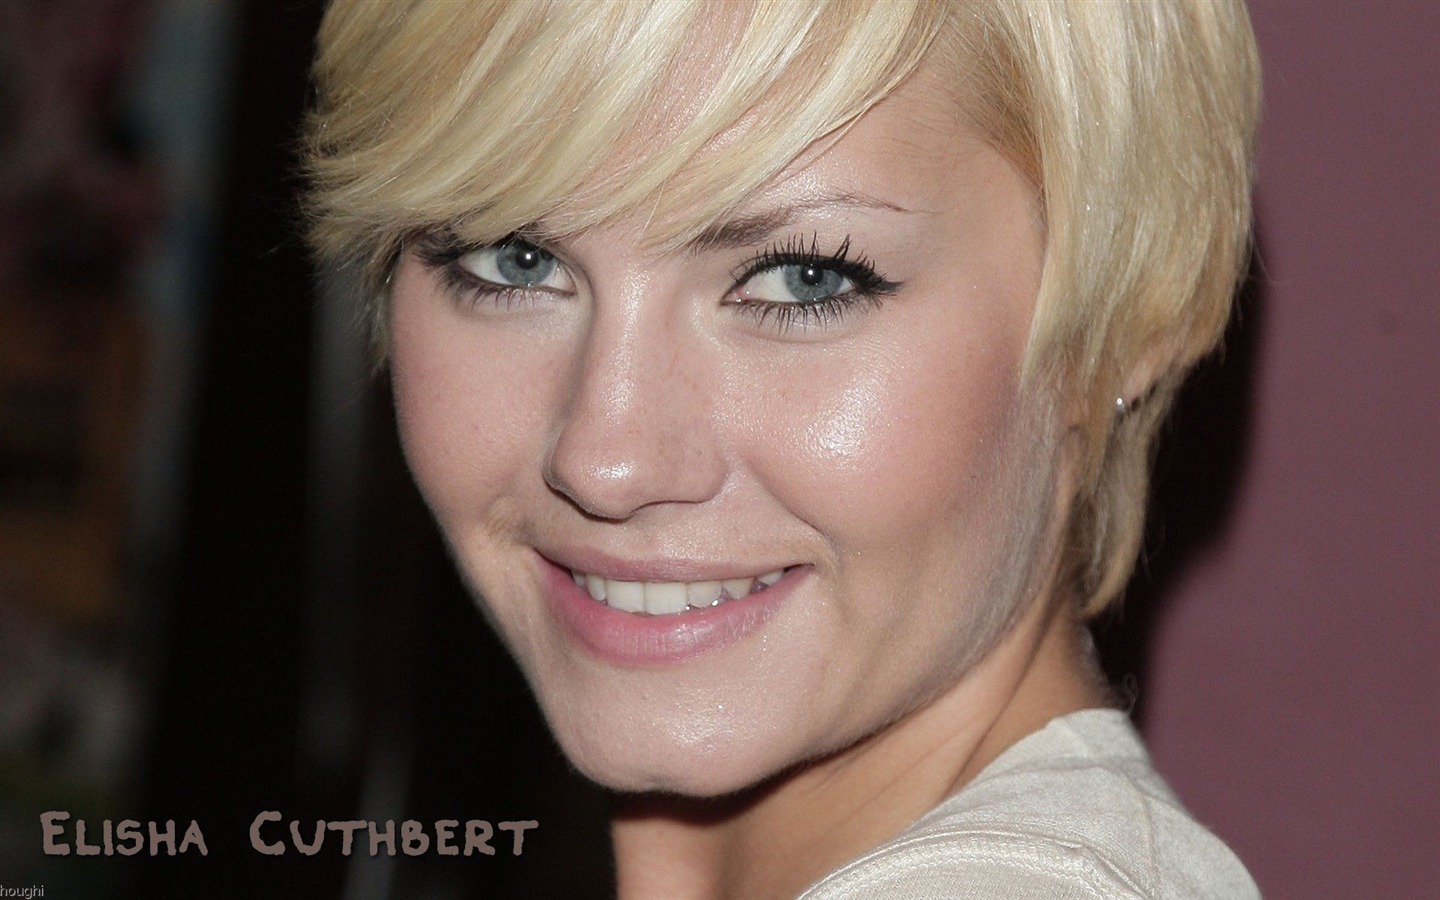 Elisha Cuthbert #023 - 1440x900 Wallpapers Pictures Photos Images